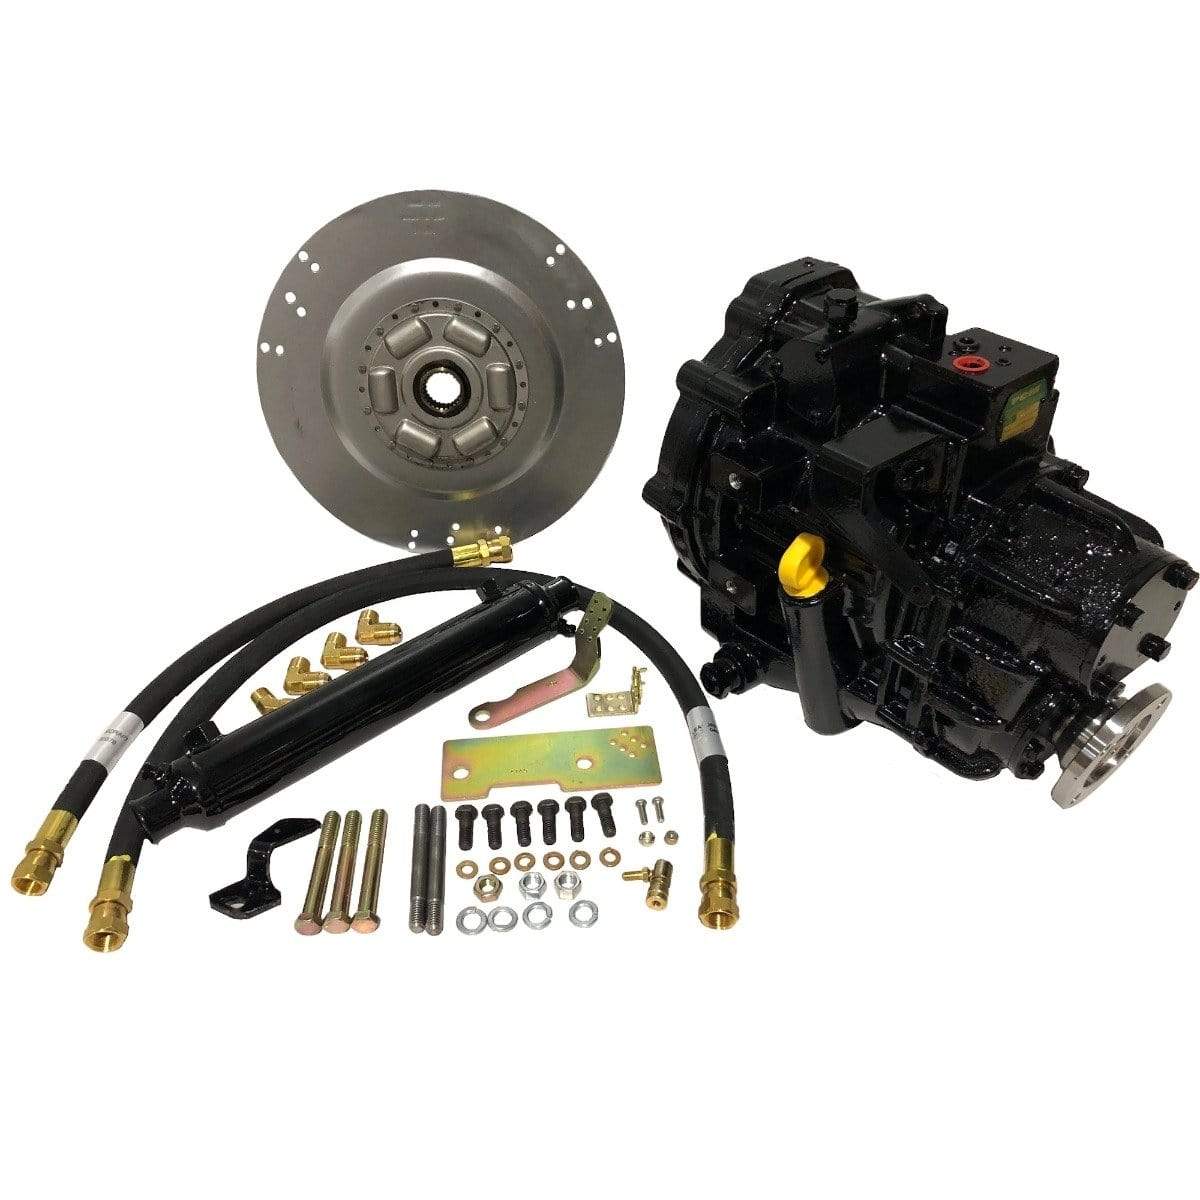 Pleasurecraft Not Qualified for Free Shipping Pleasurecraft Transmission Kit GM 80a 1.23:1 Ratio #RF157017-27A